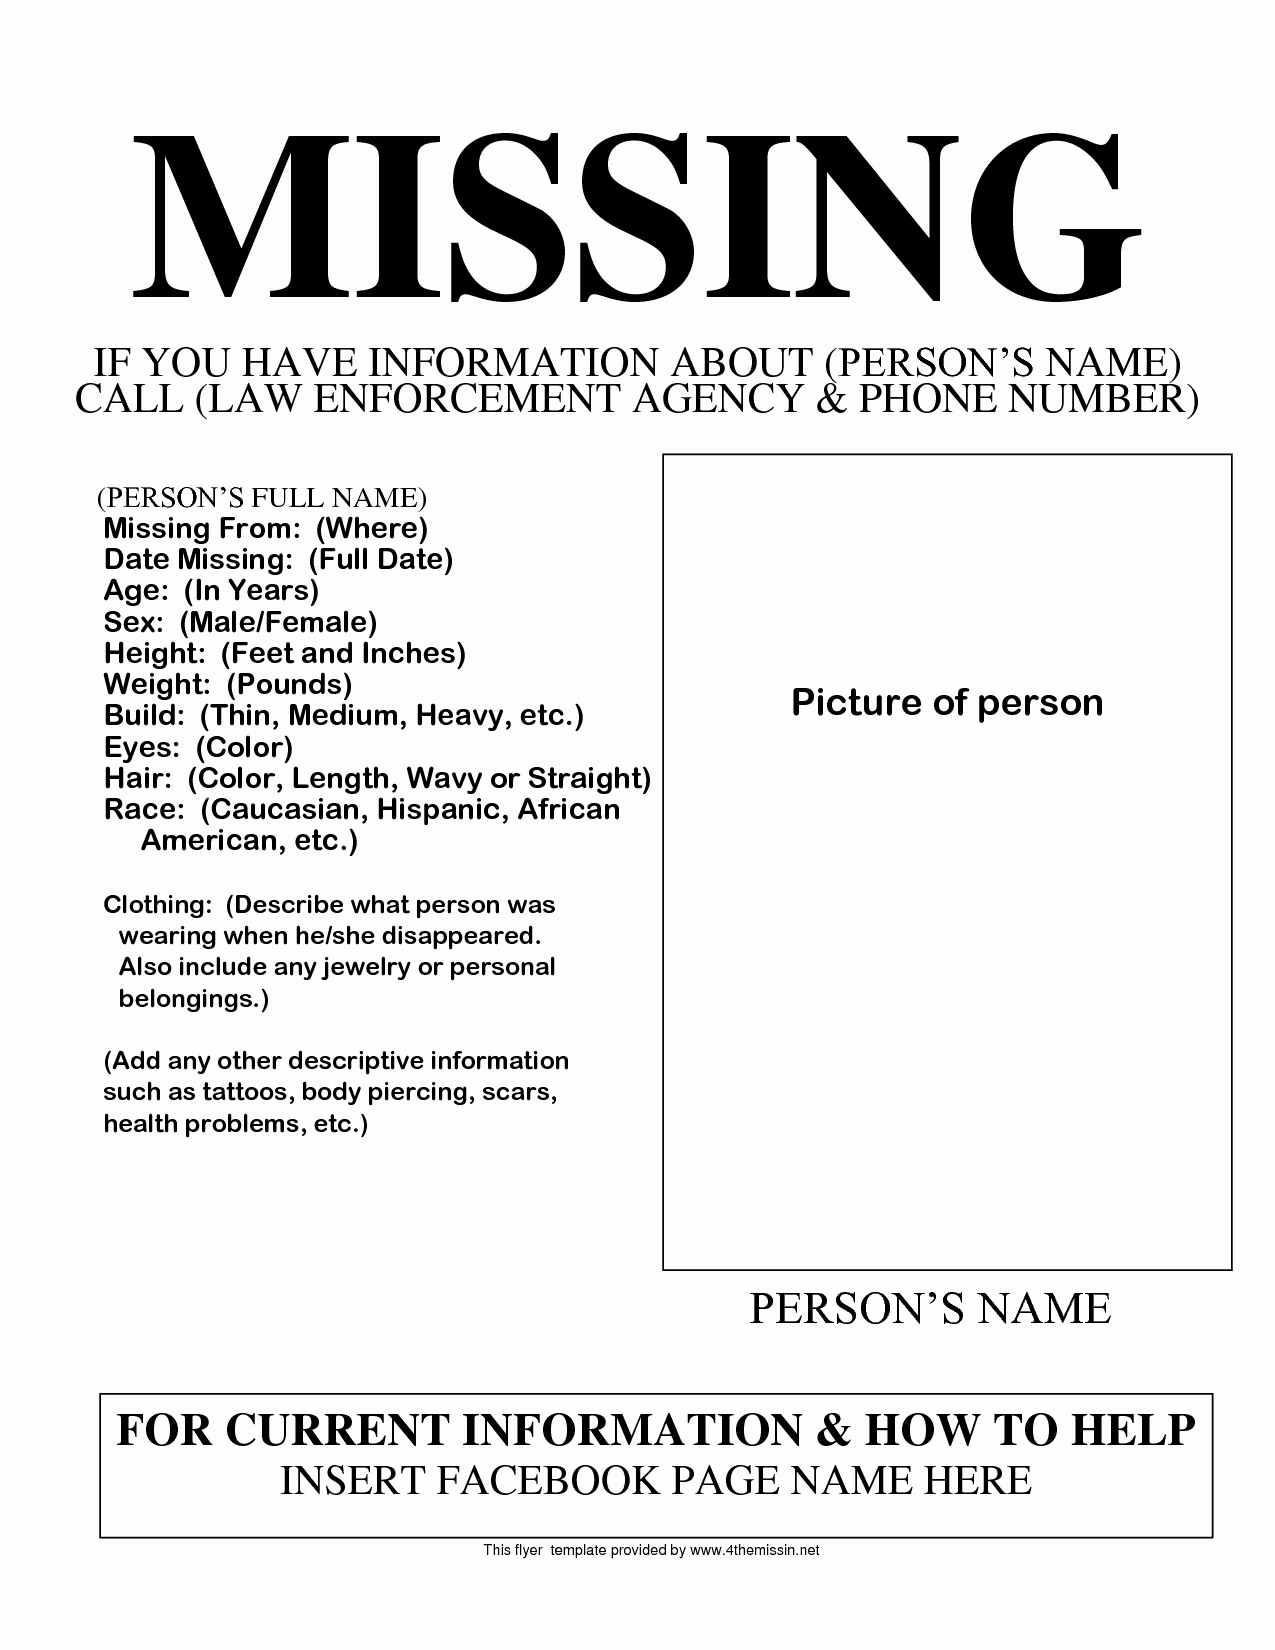 Missing Person Poster Template Unique Sammy Lee